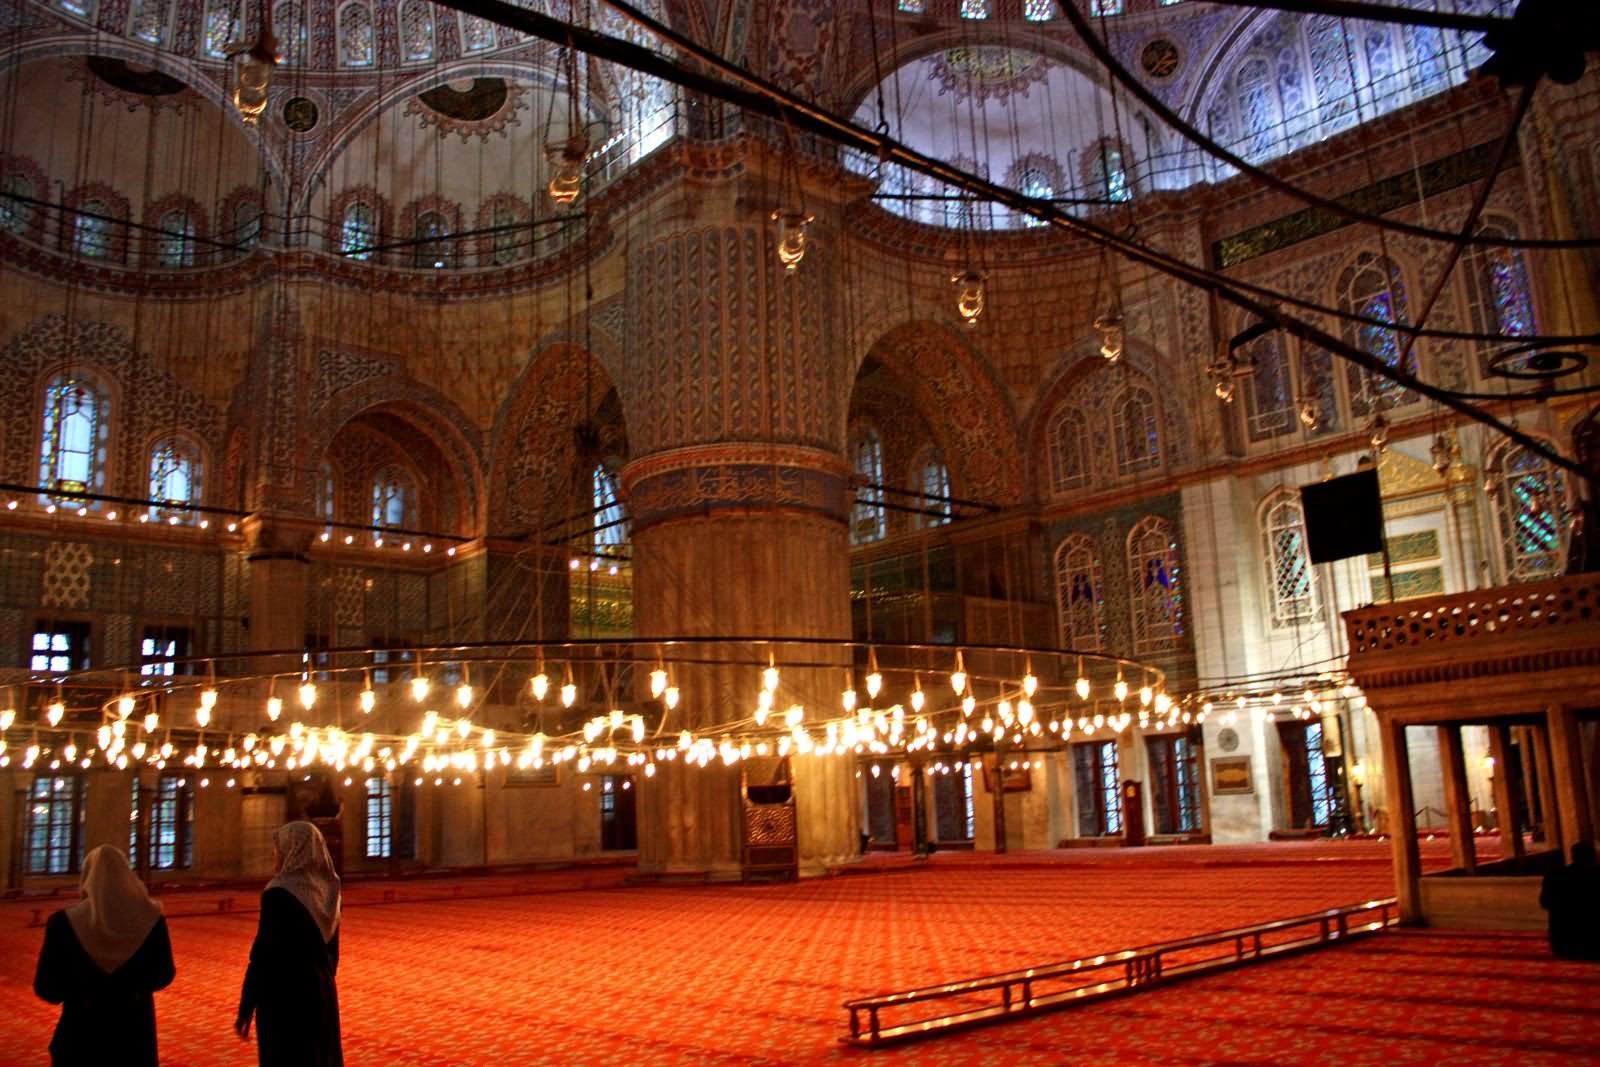 Interior Lights Of The Blue Mosque In Istanbul, Turkey